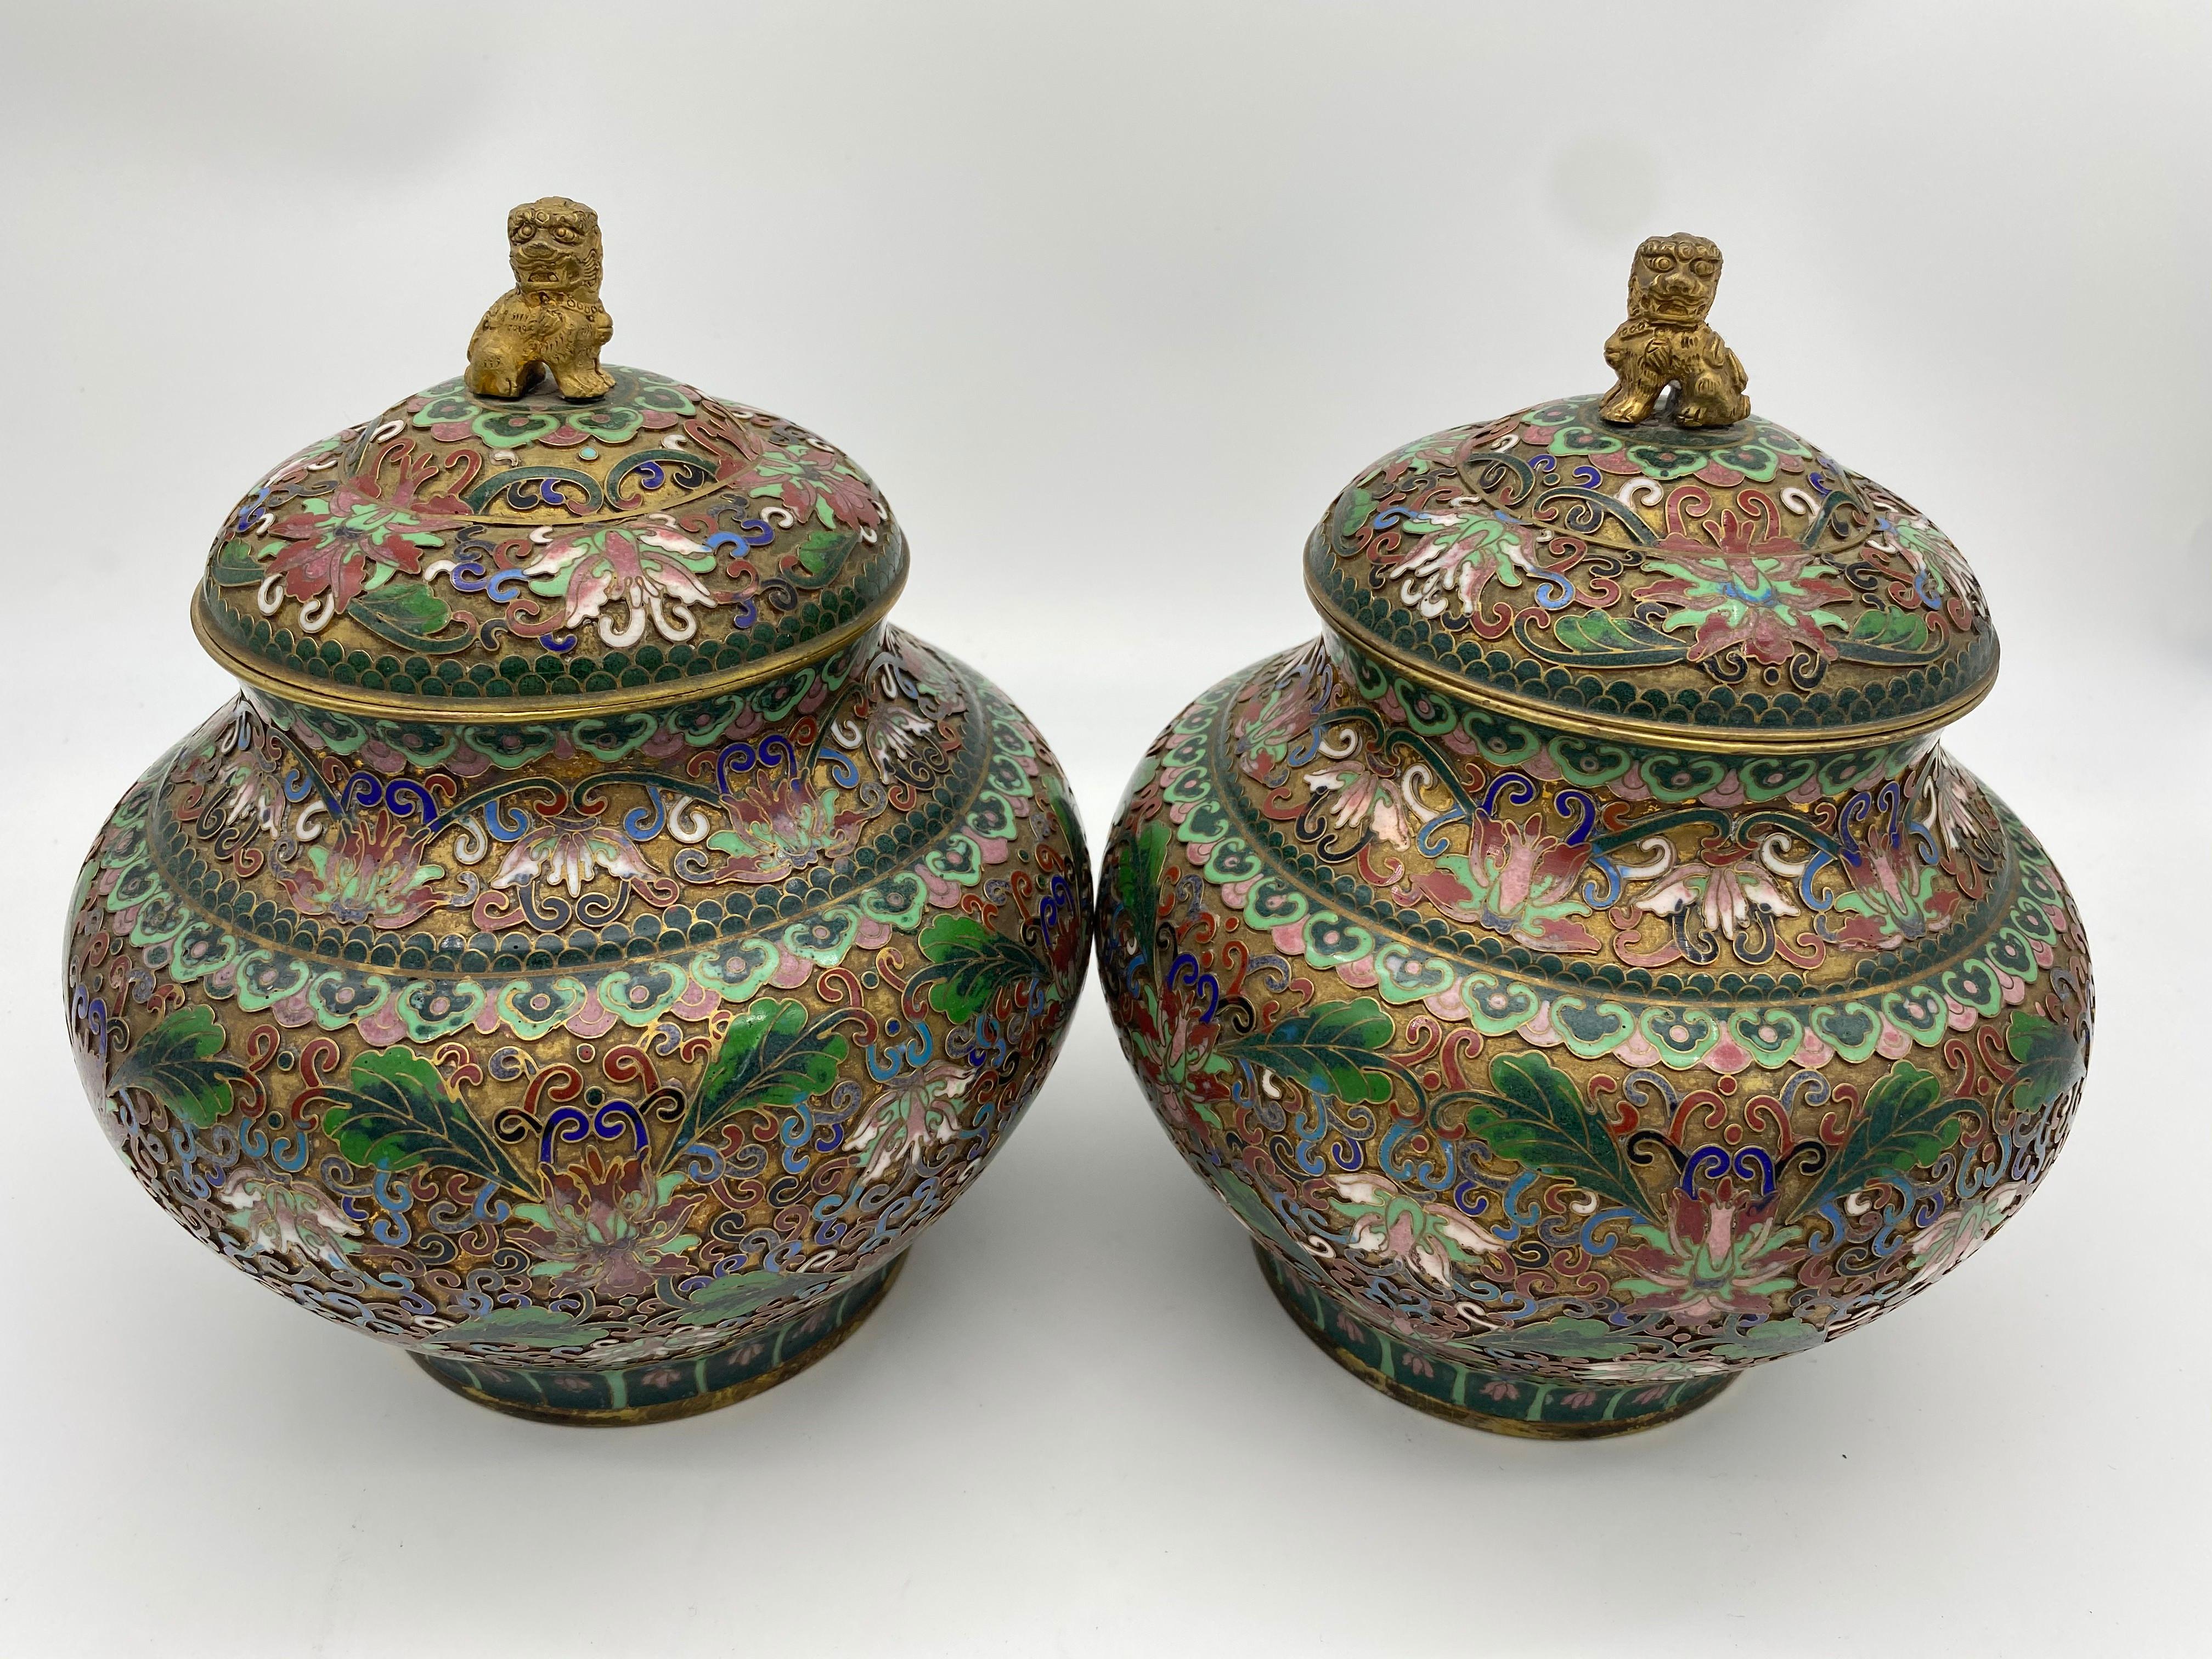 A pair of Chinese cloisonné enamel 8.5